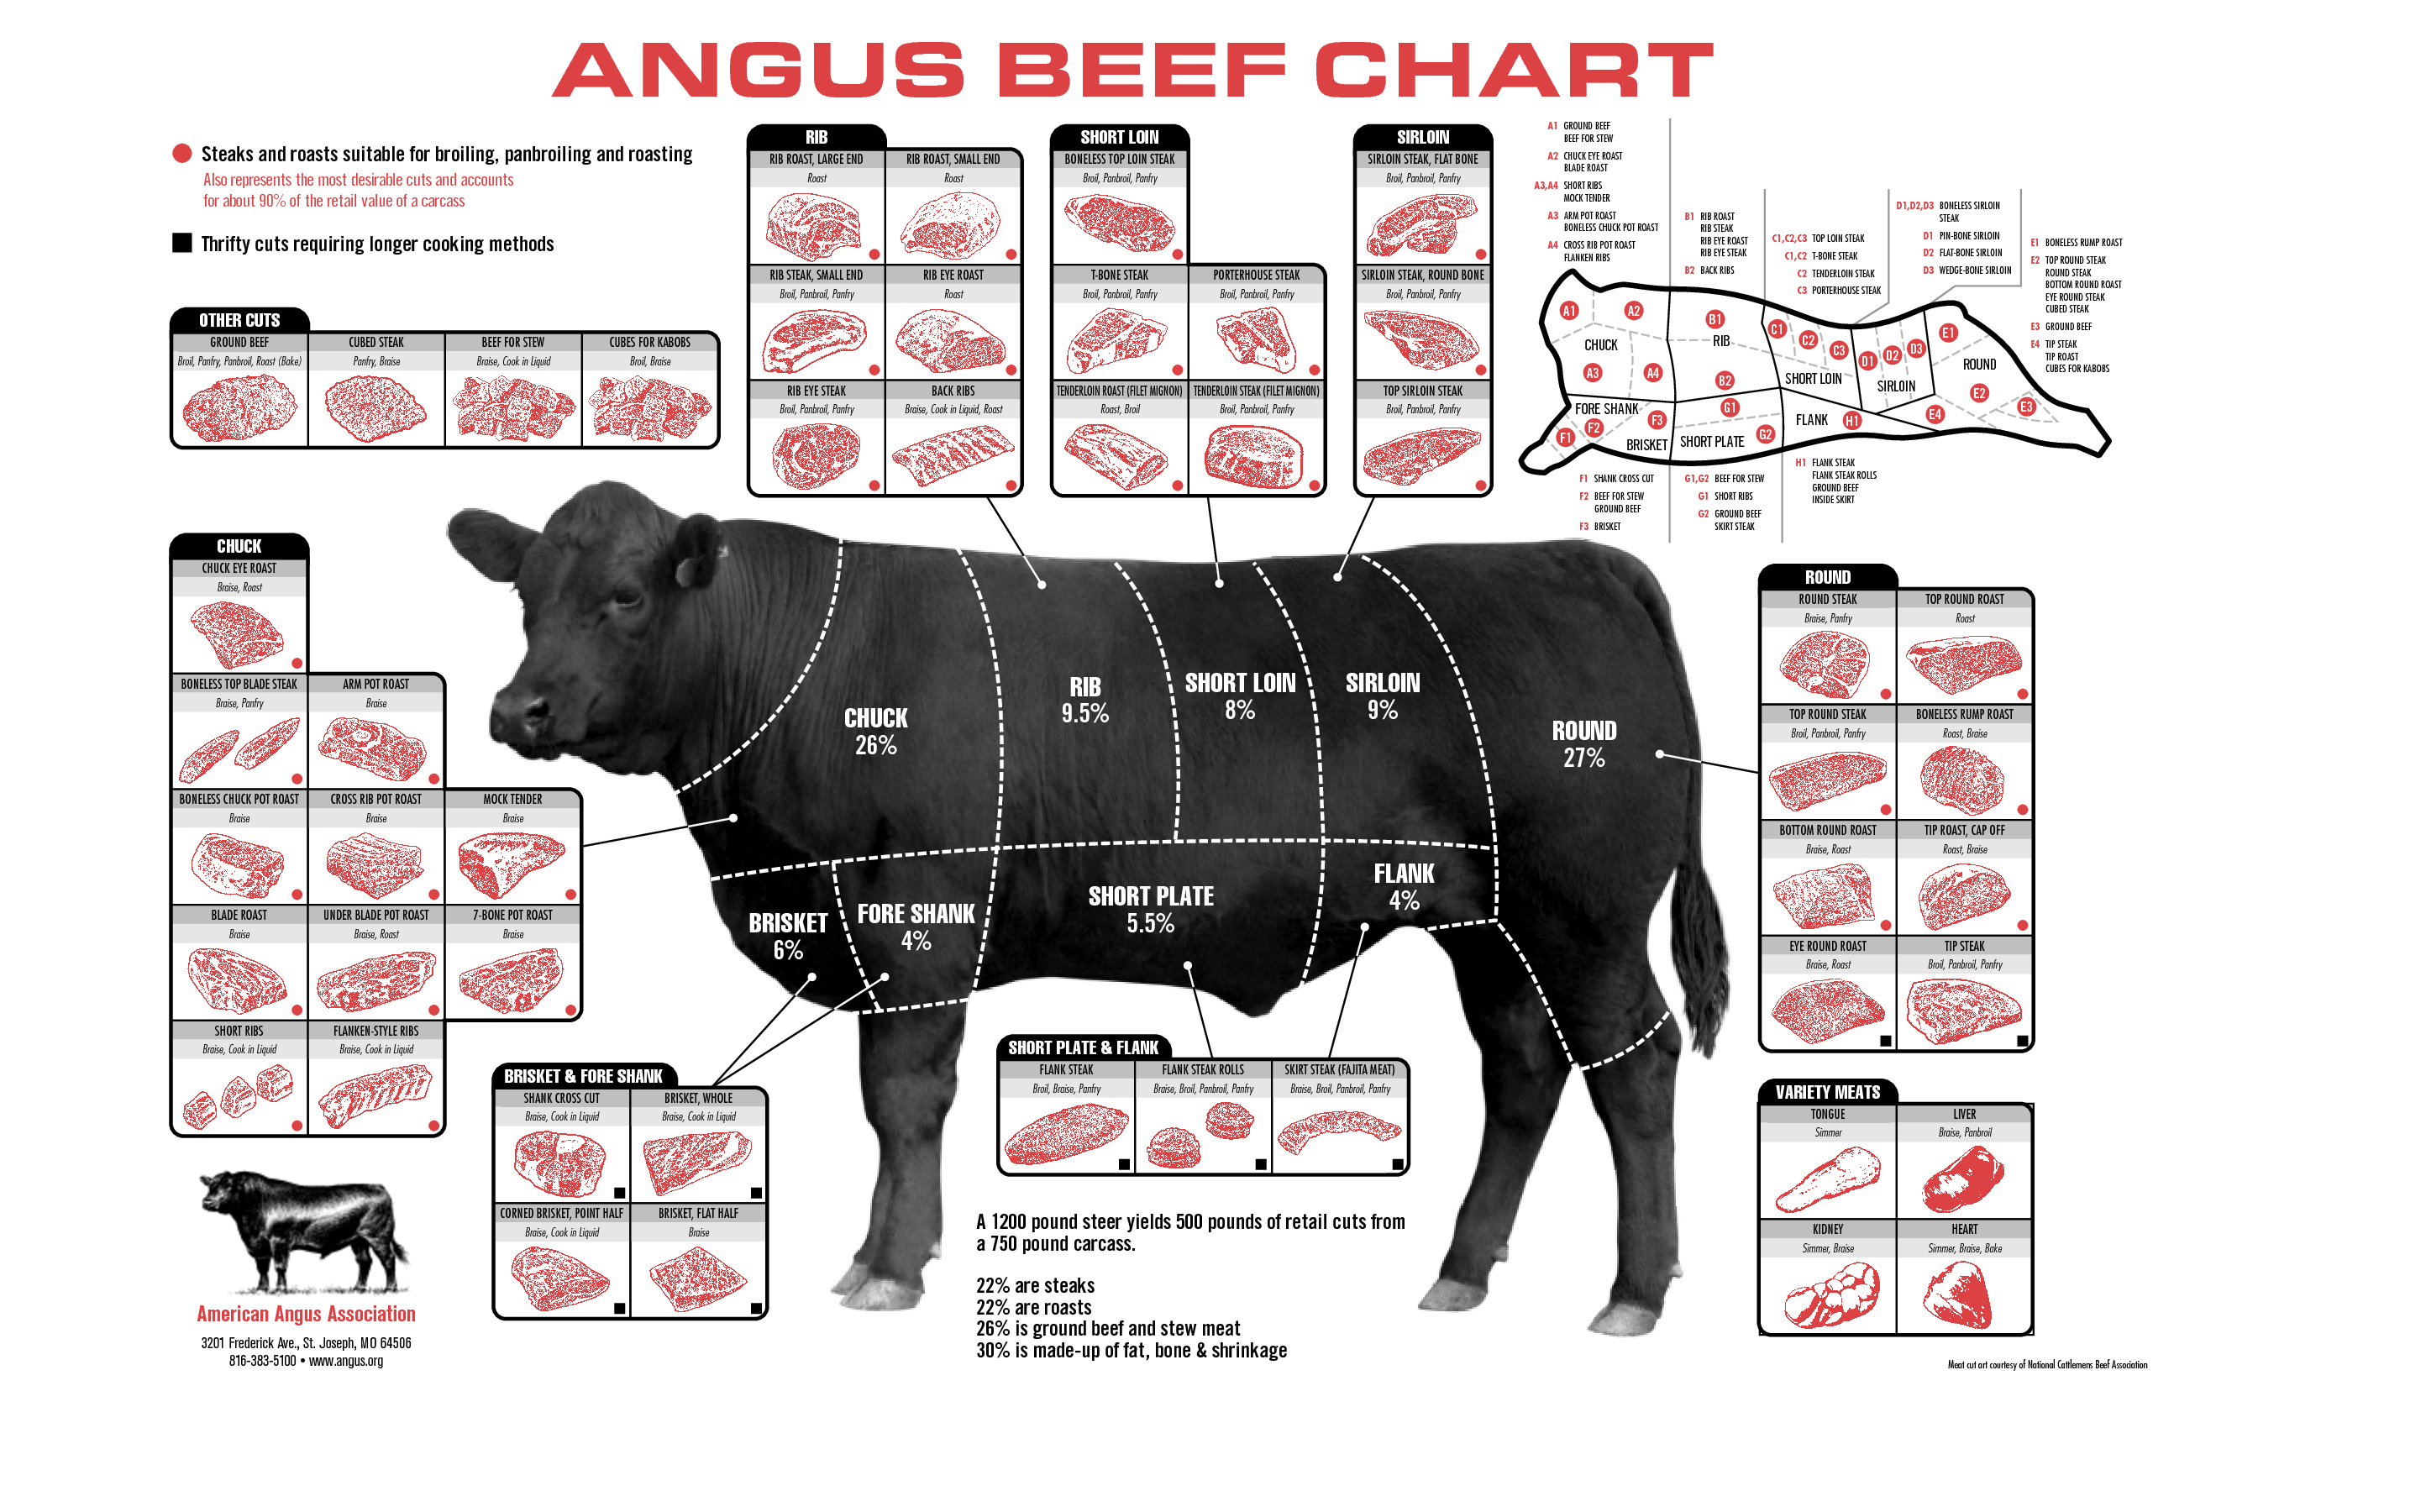 Our Certified Angus Beef – The Caroline